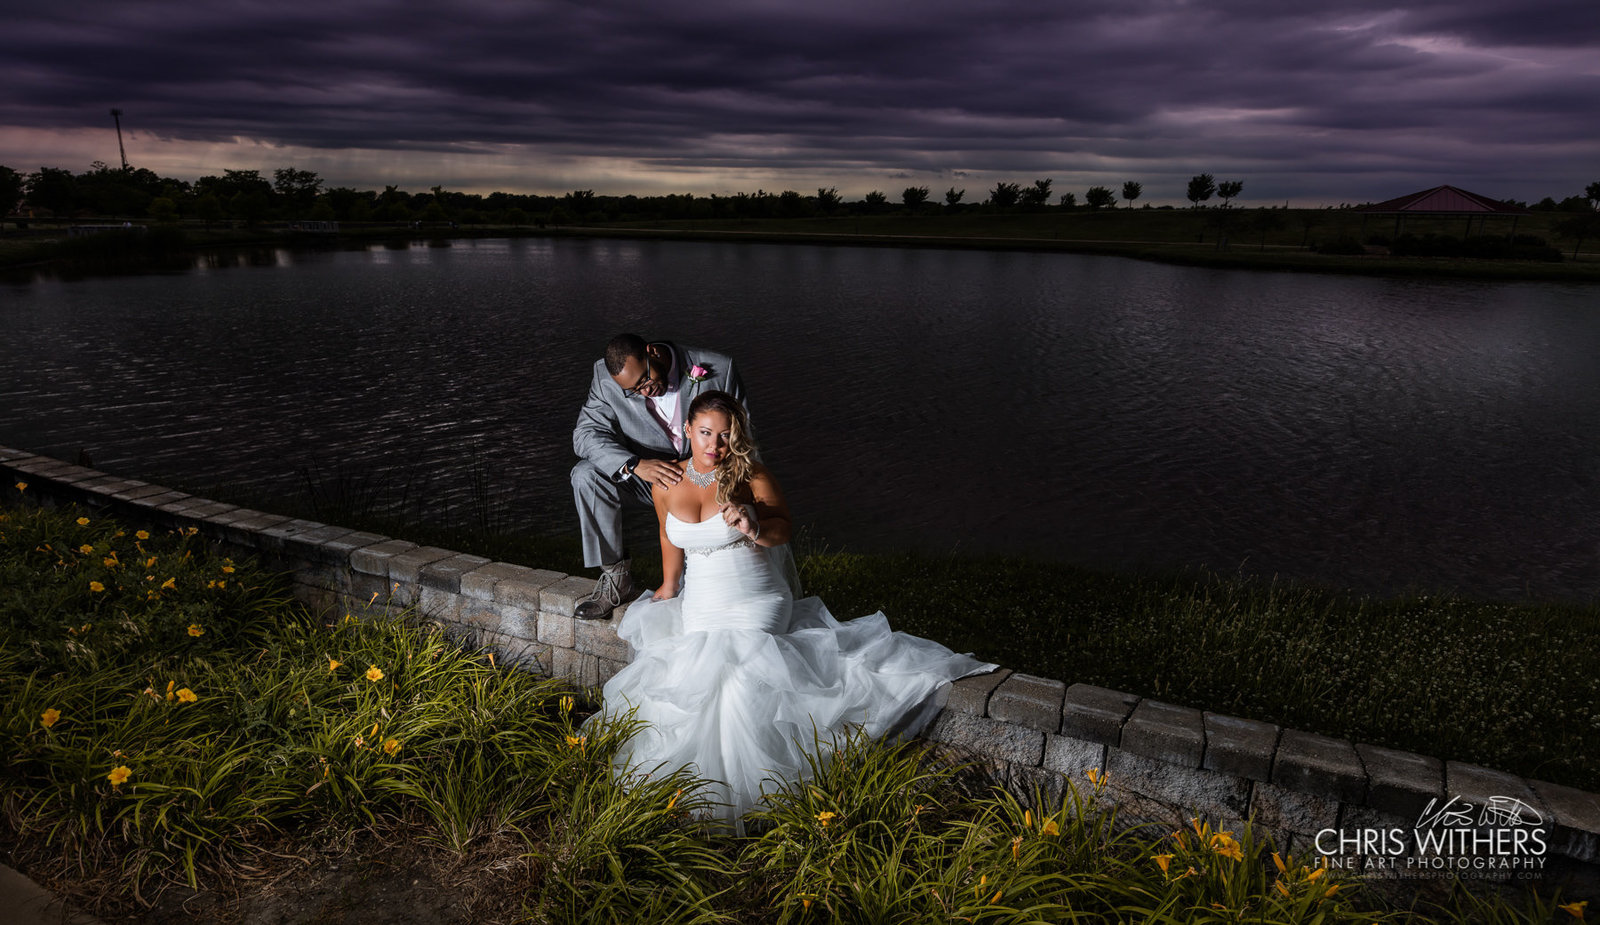 Springfield Illinois Wedding Photographer - Chris Withers Photography (127 of 159)